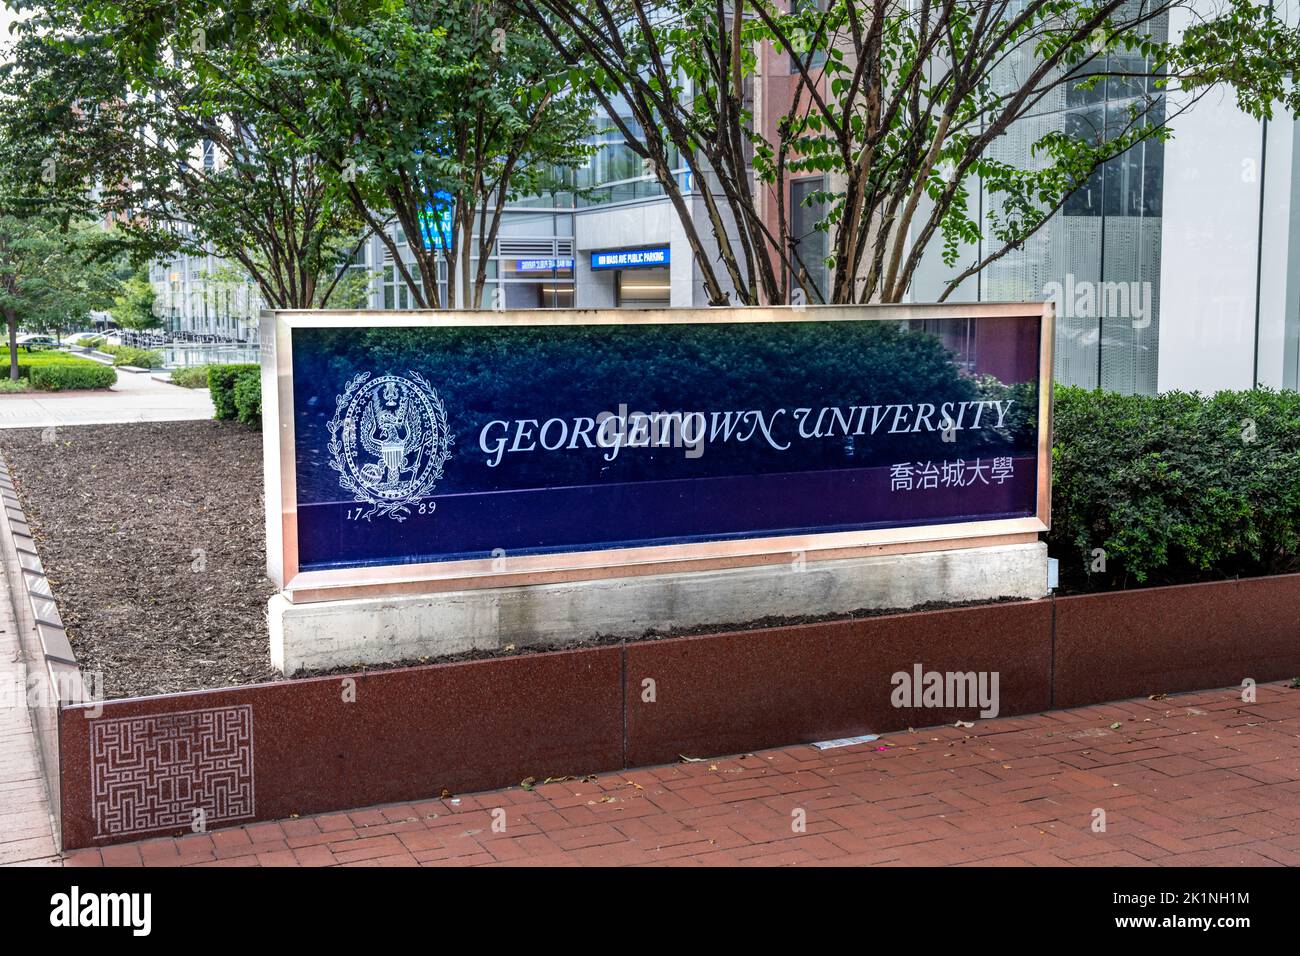 Washington, DC - Sept. 5, 2022: Georgetown University School of Continuing Studies sign with Chinese text Stock Photo